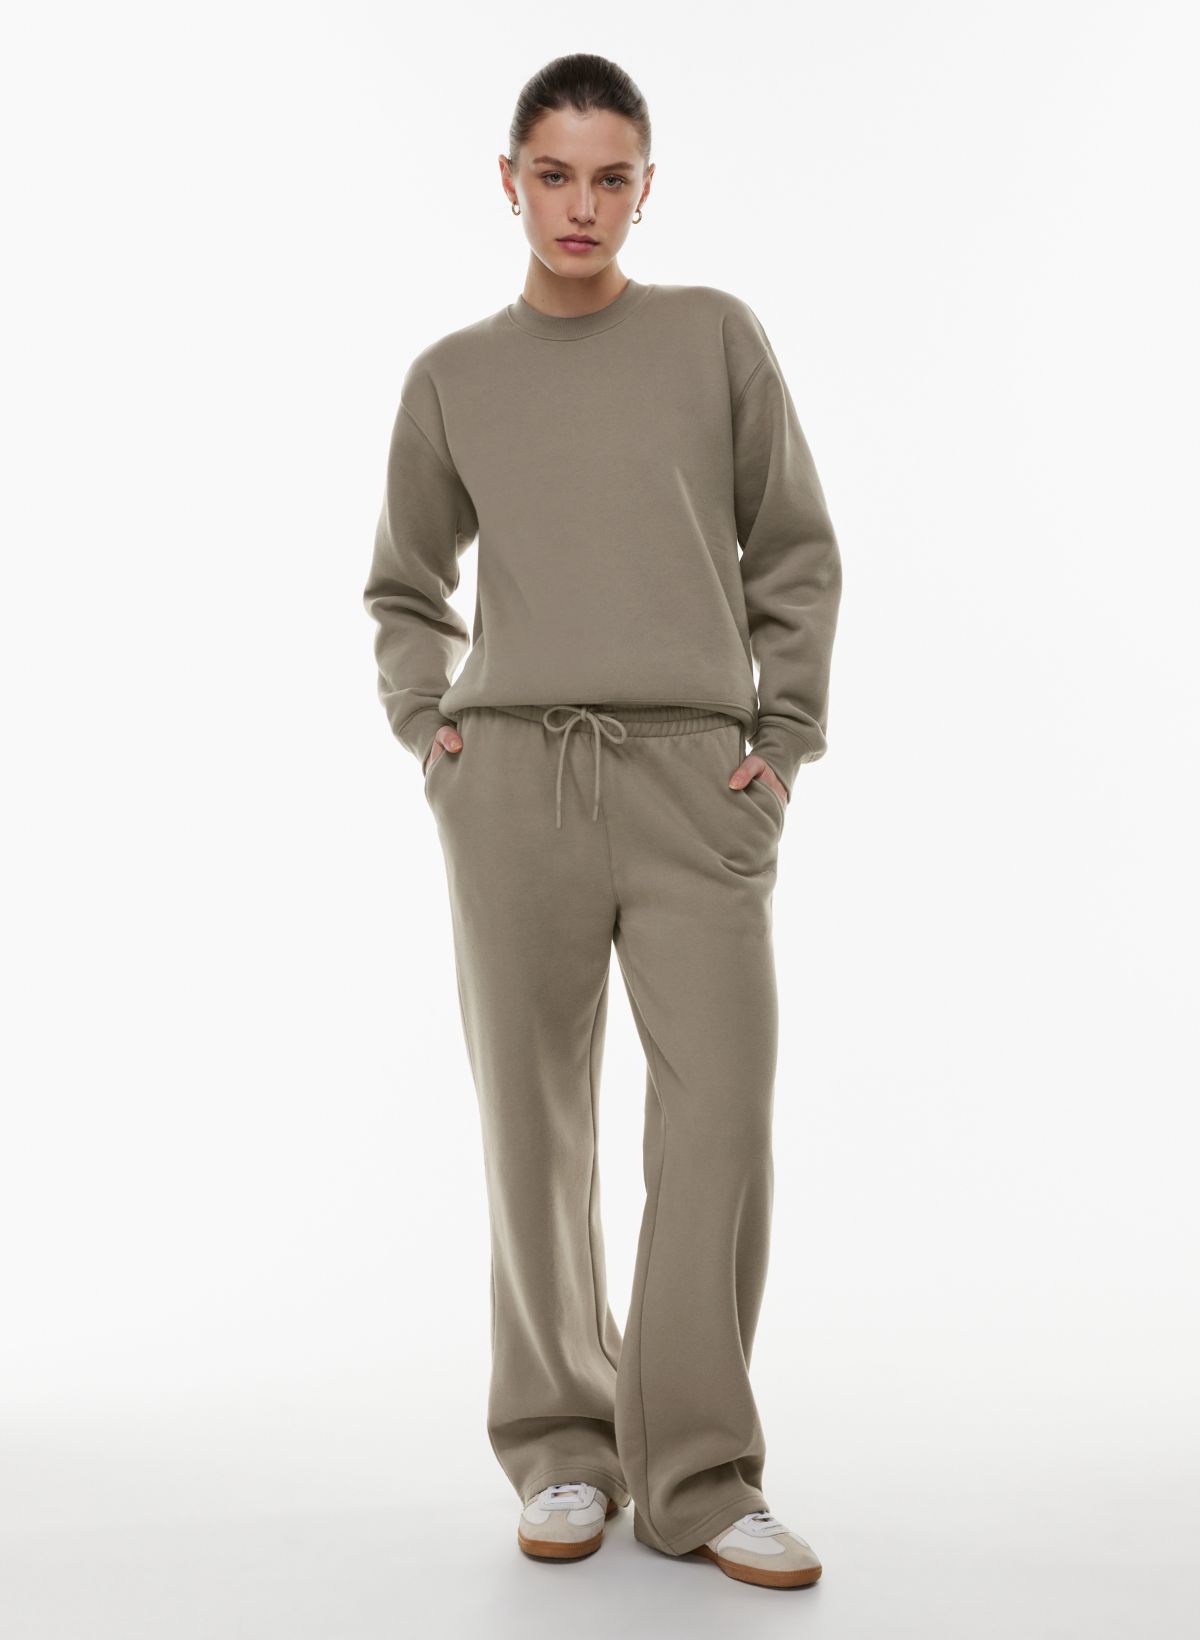 G-Style USA Men's Casual Lounge Fleece Sweatpants with Pockets